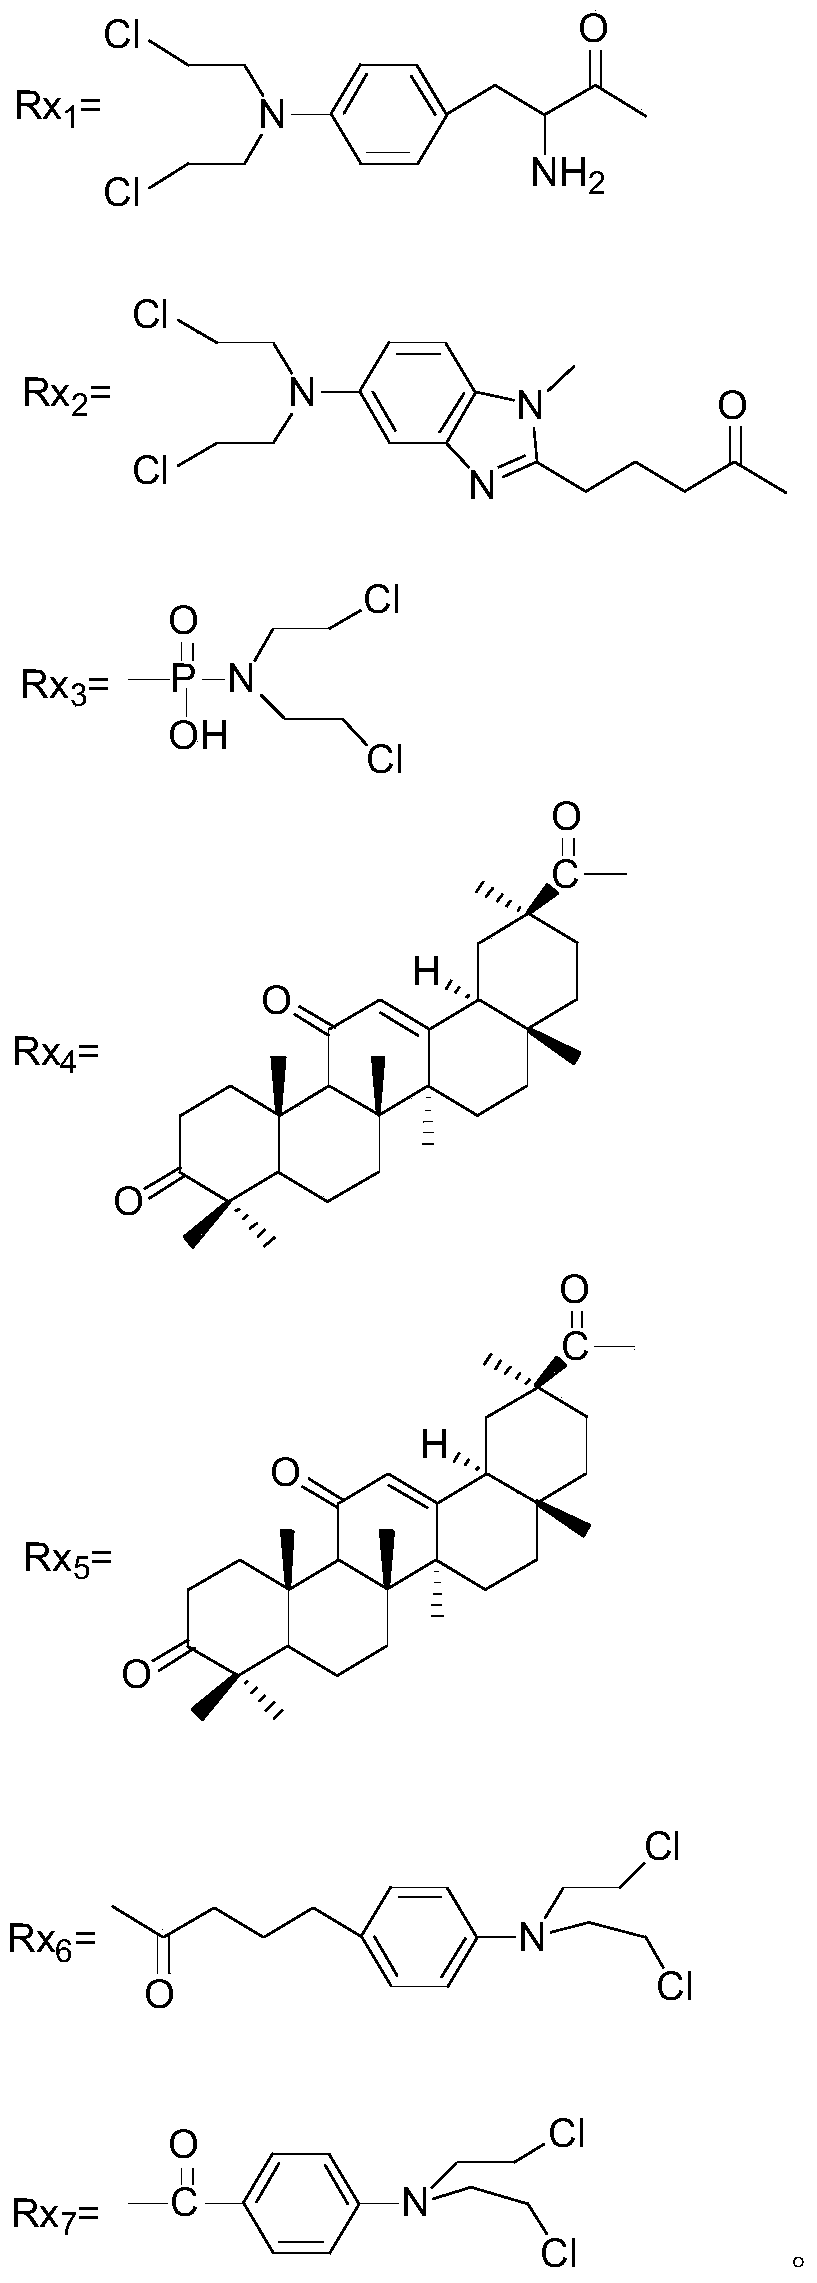 A matrine derivative with antitumor properties